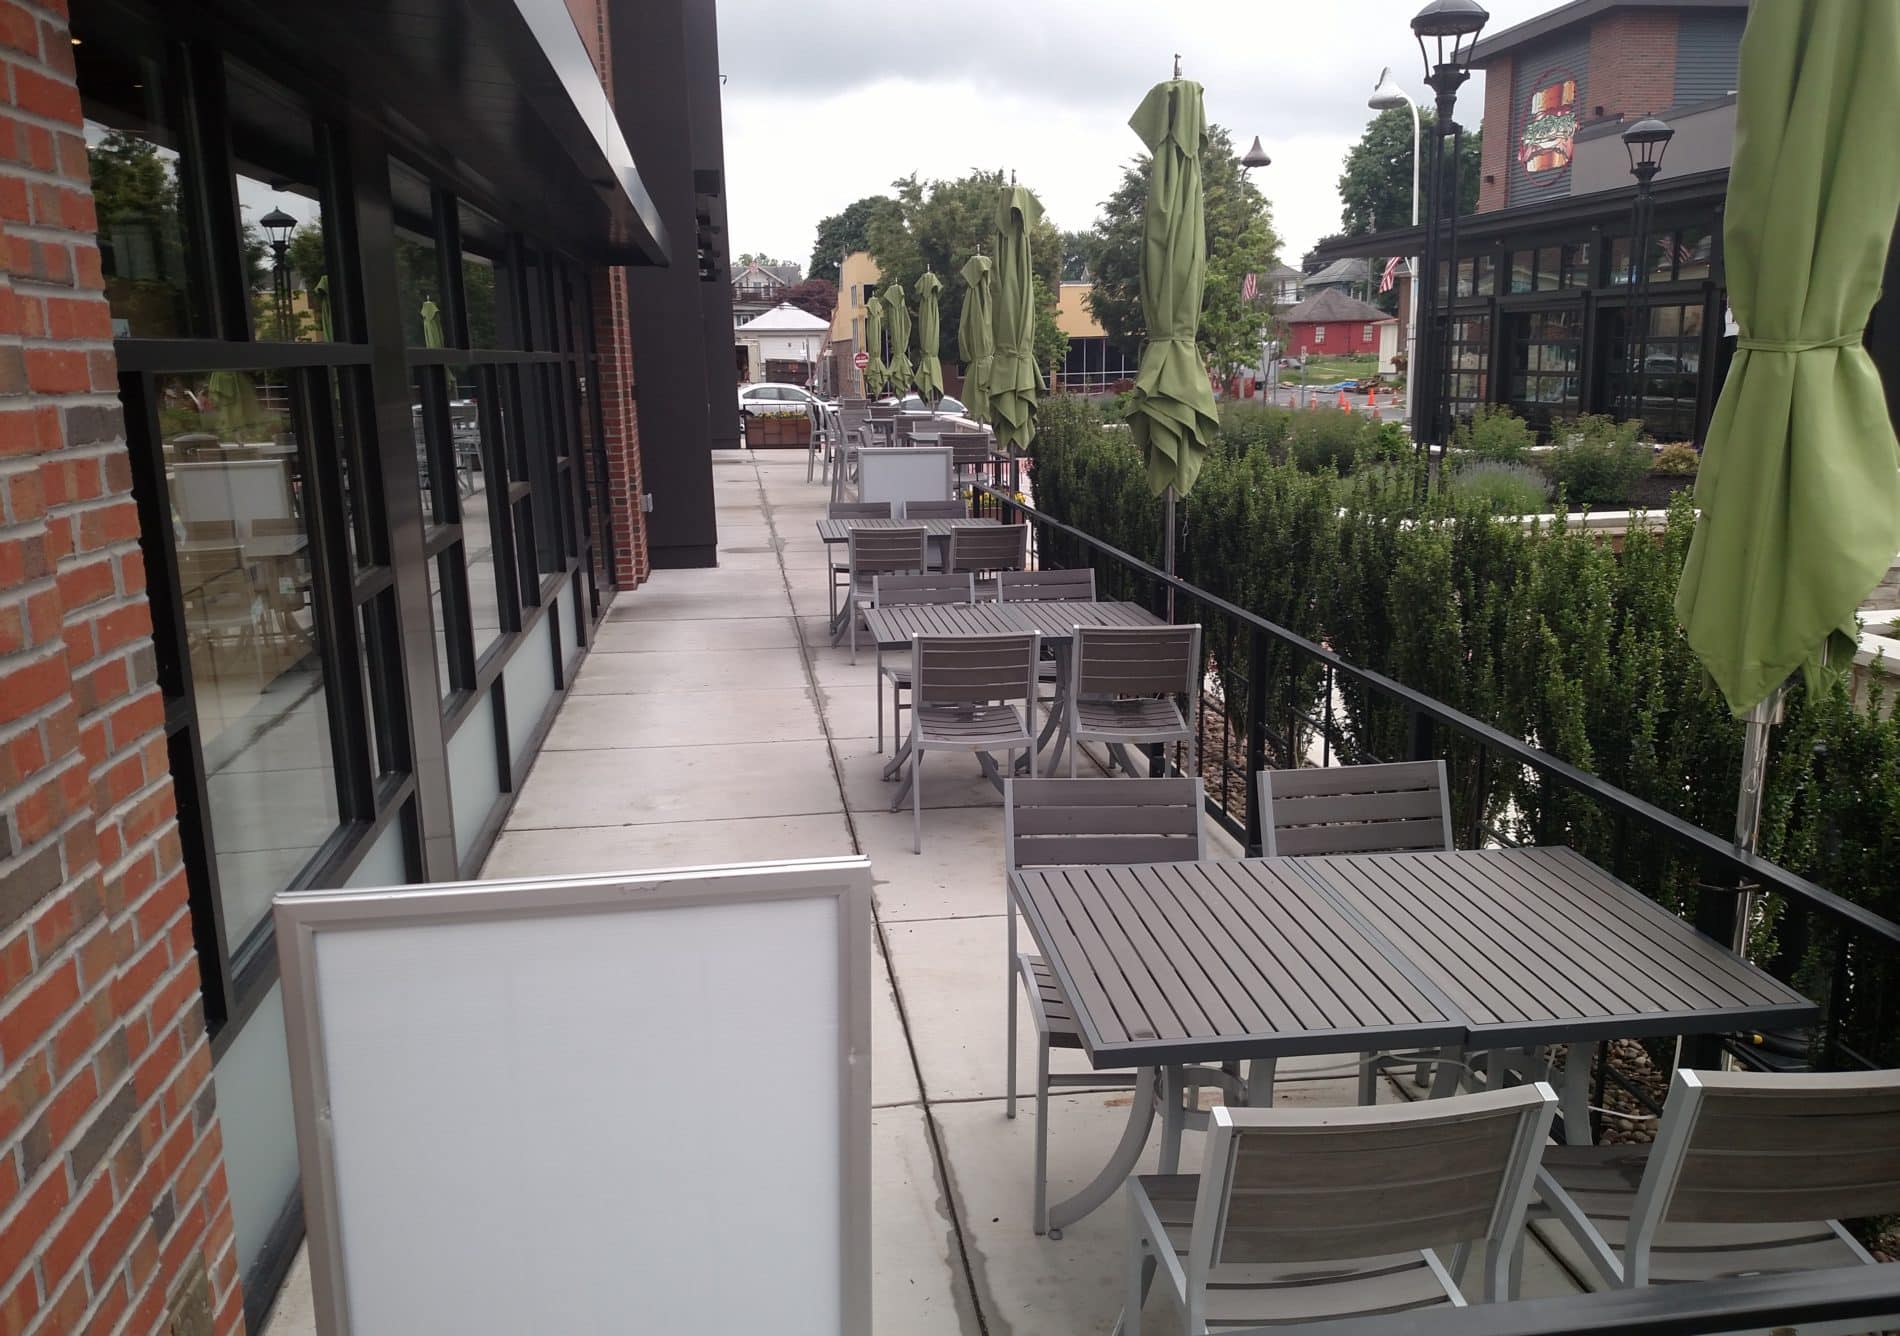 outdoor dining area showing tables with umbrellas